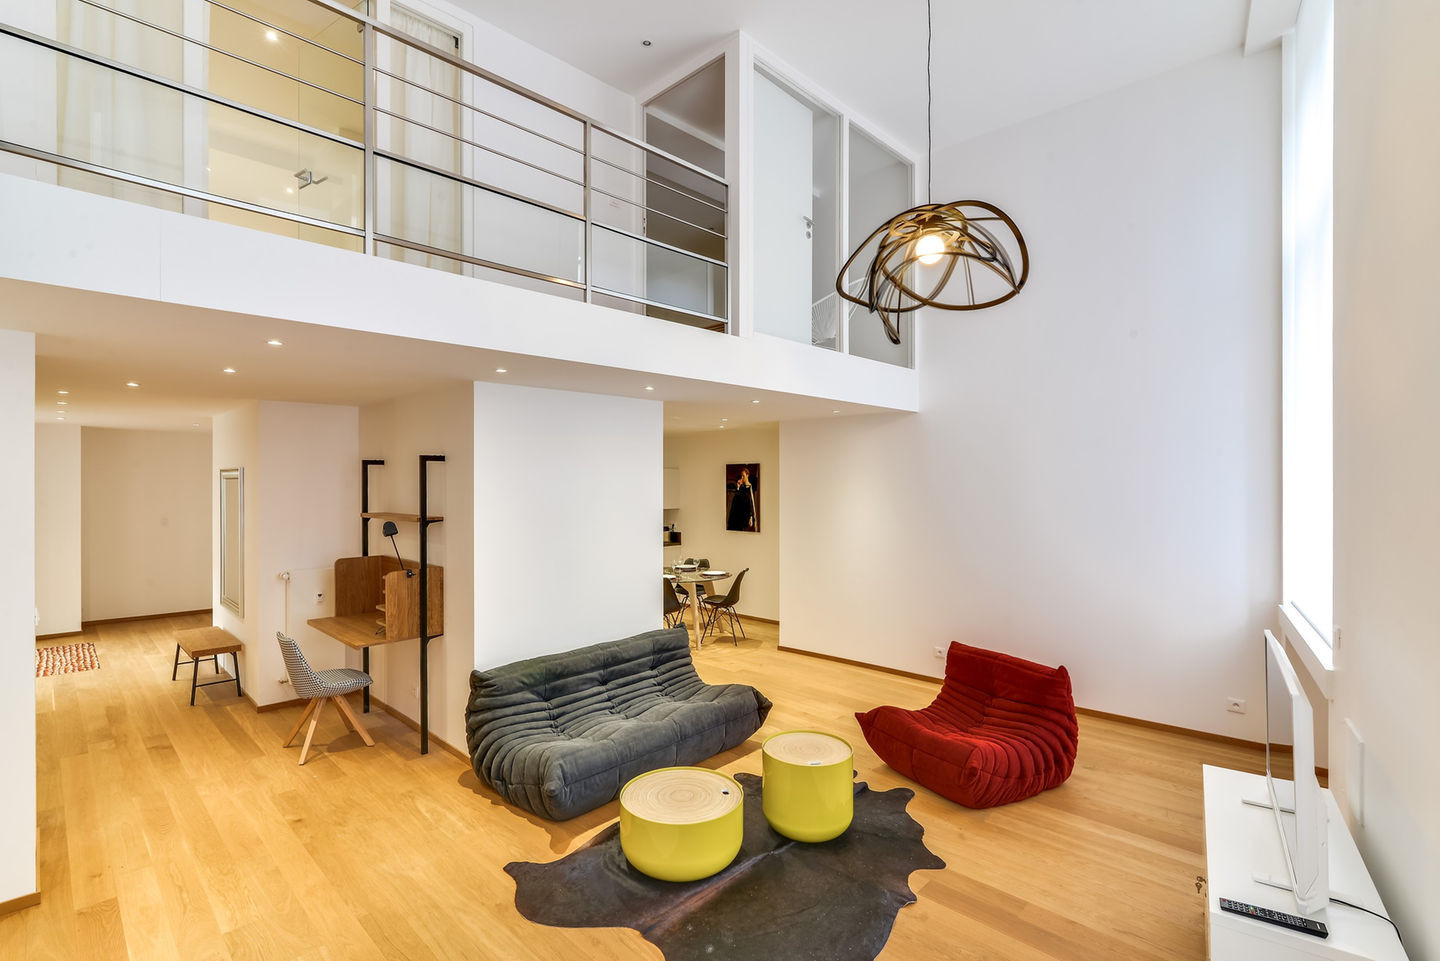  in Strasbourg - loft luxe 127m2 a  500m cathedral    2br 2bth